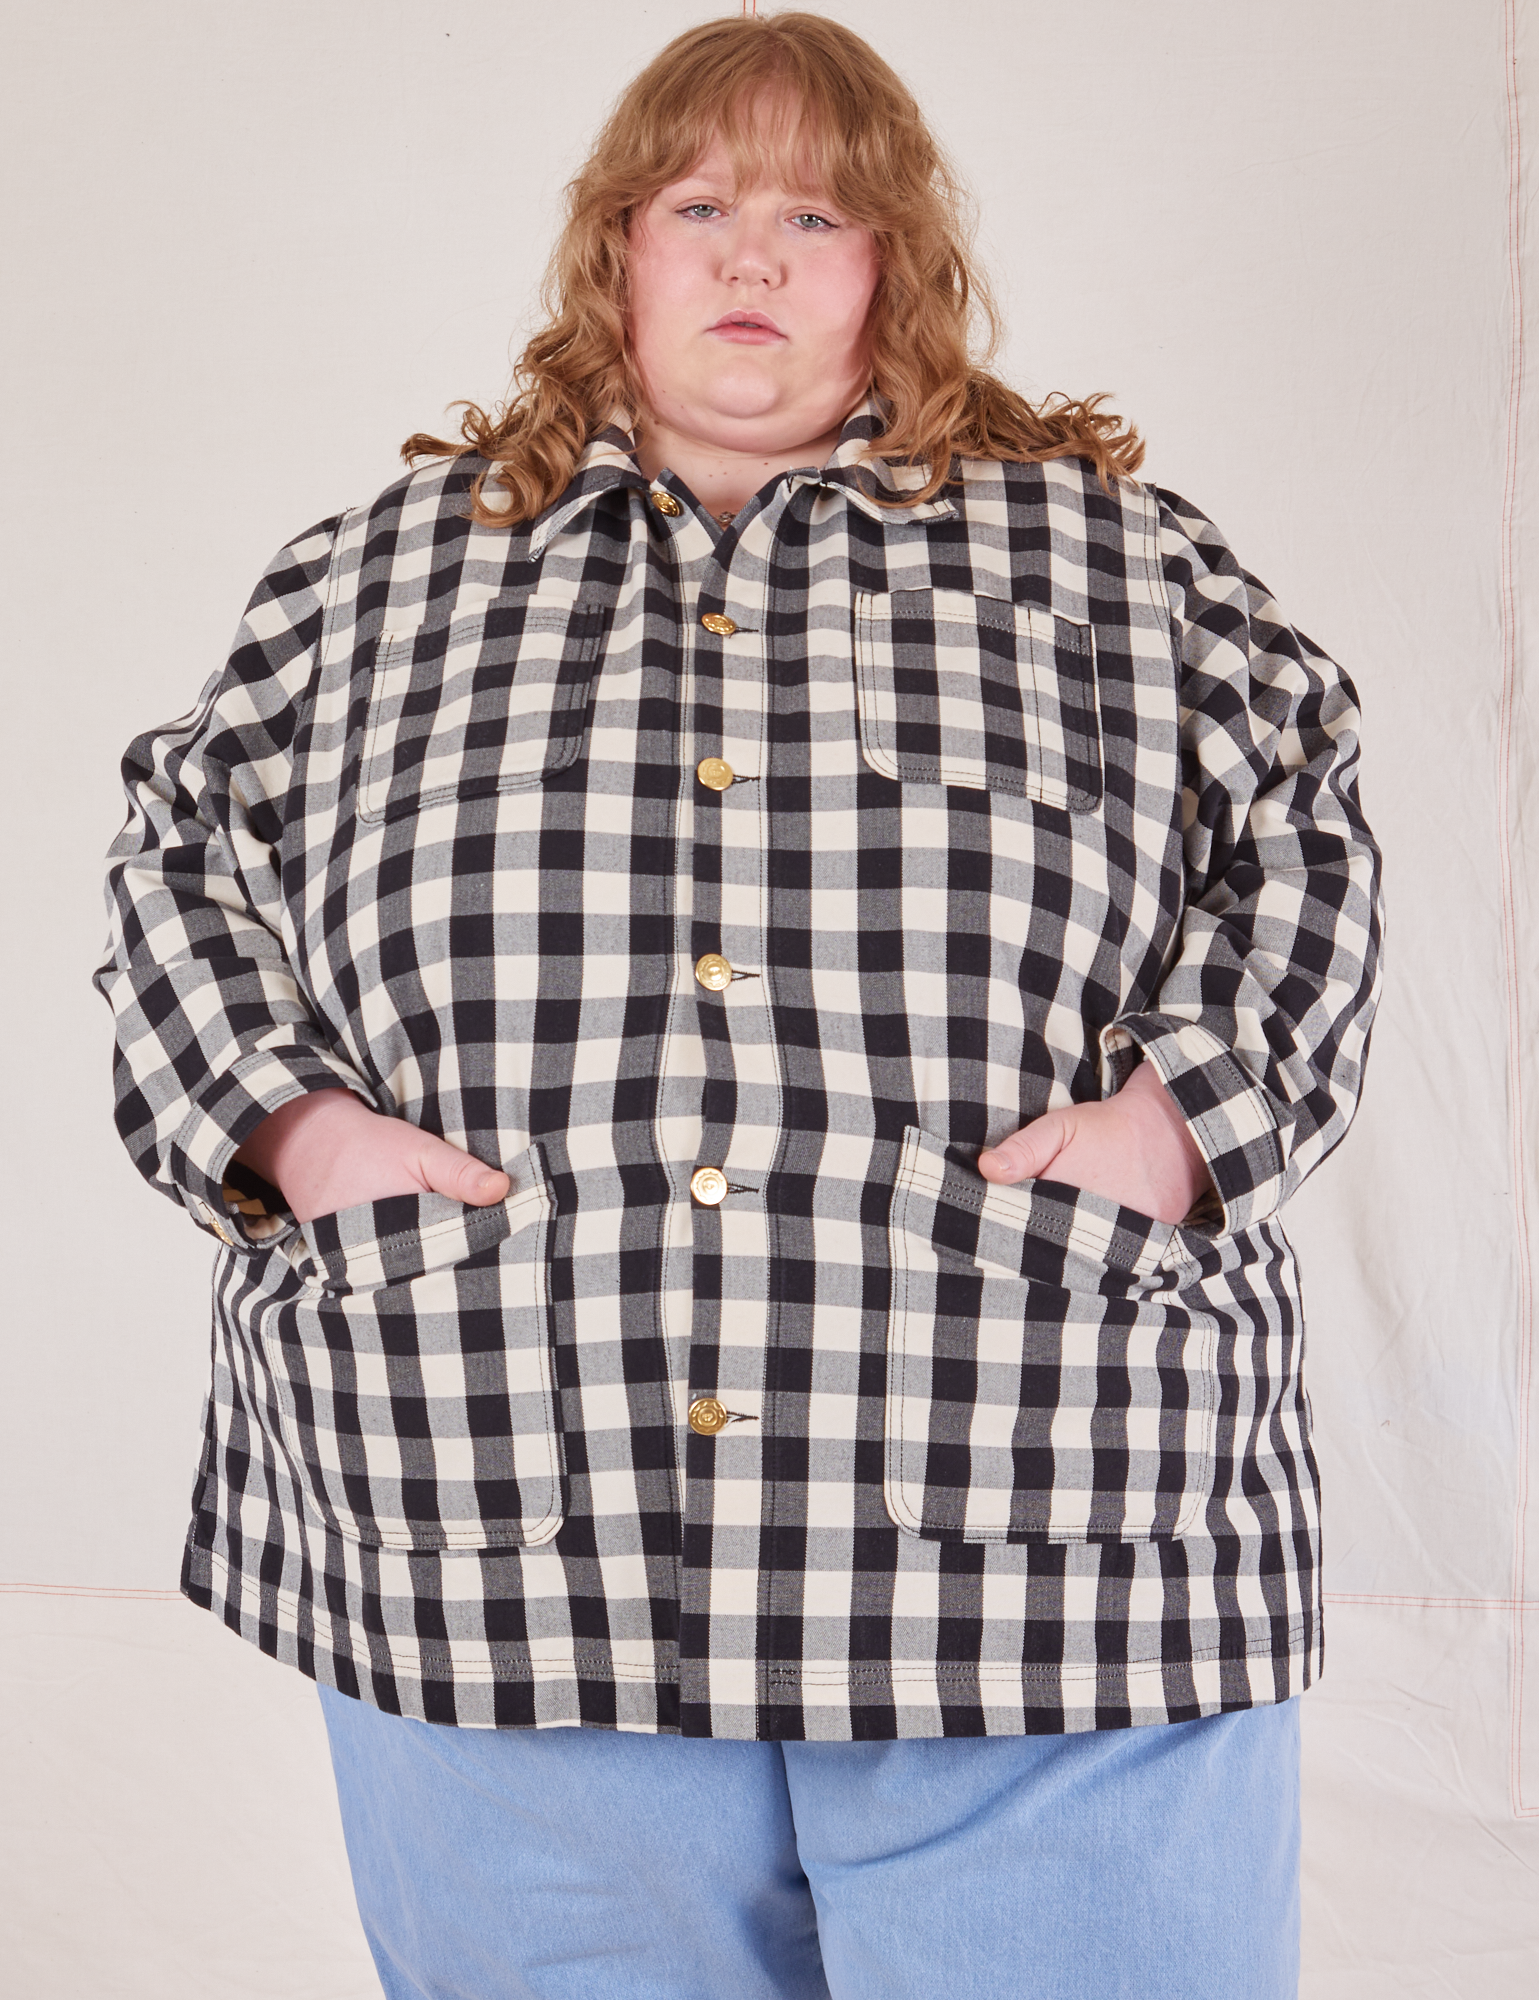 Catie is wearing a buttoned up Big Gingham Field Coat